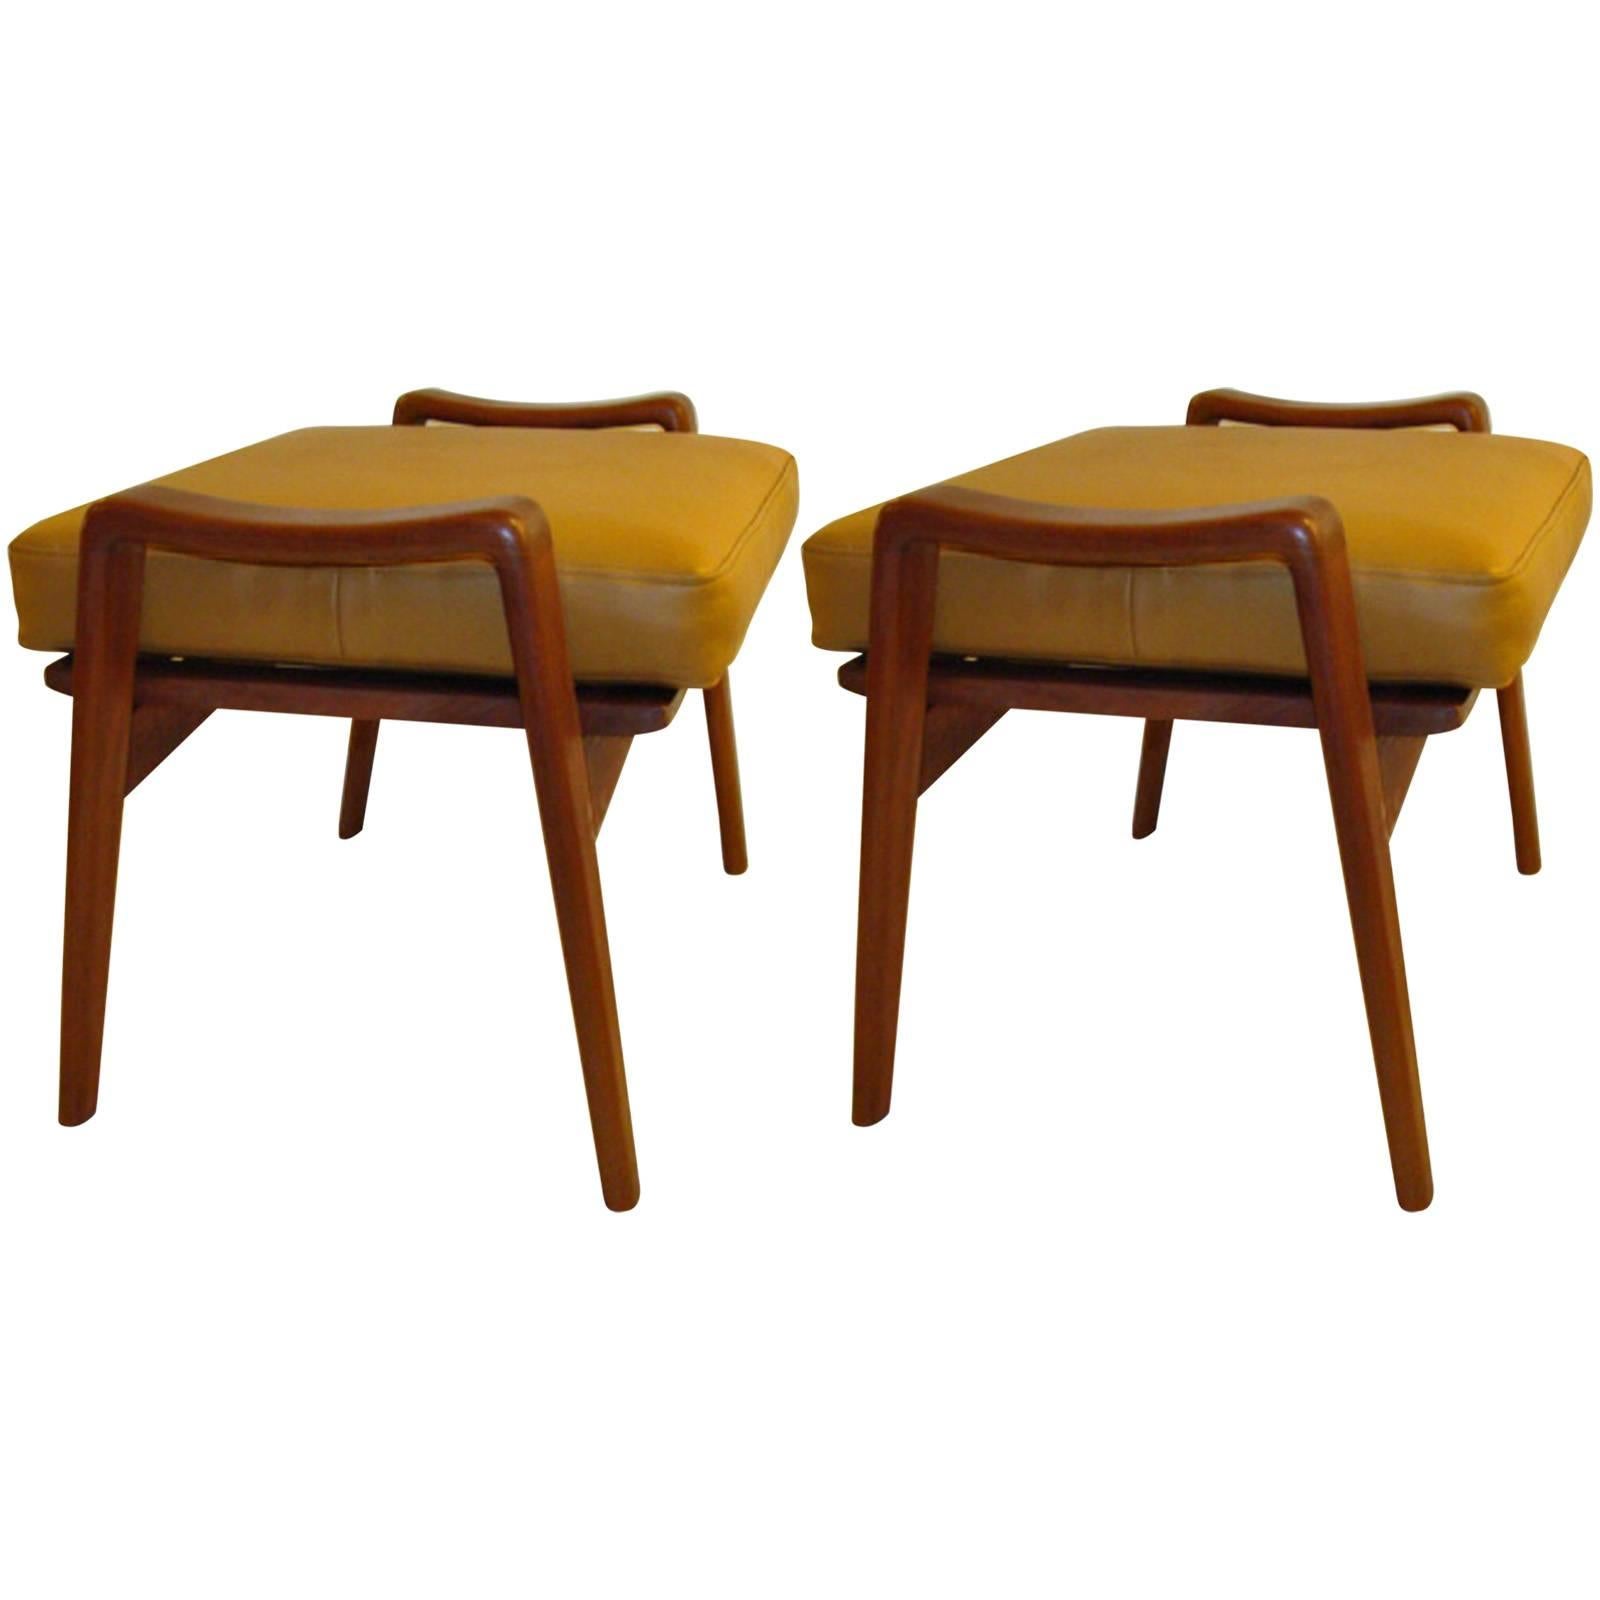 Pair of Danish Ottomans by Arne Wahl Iversen For Sale